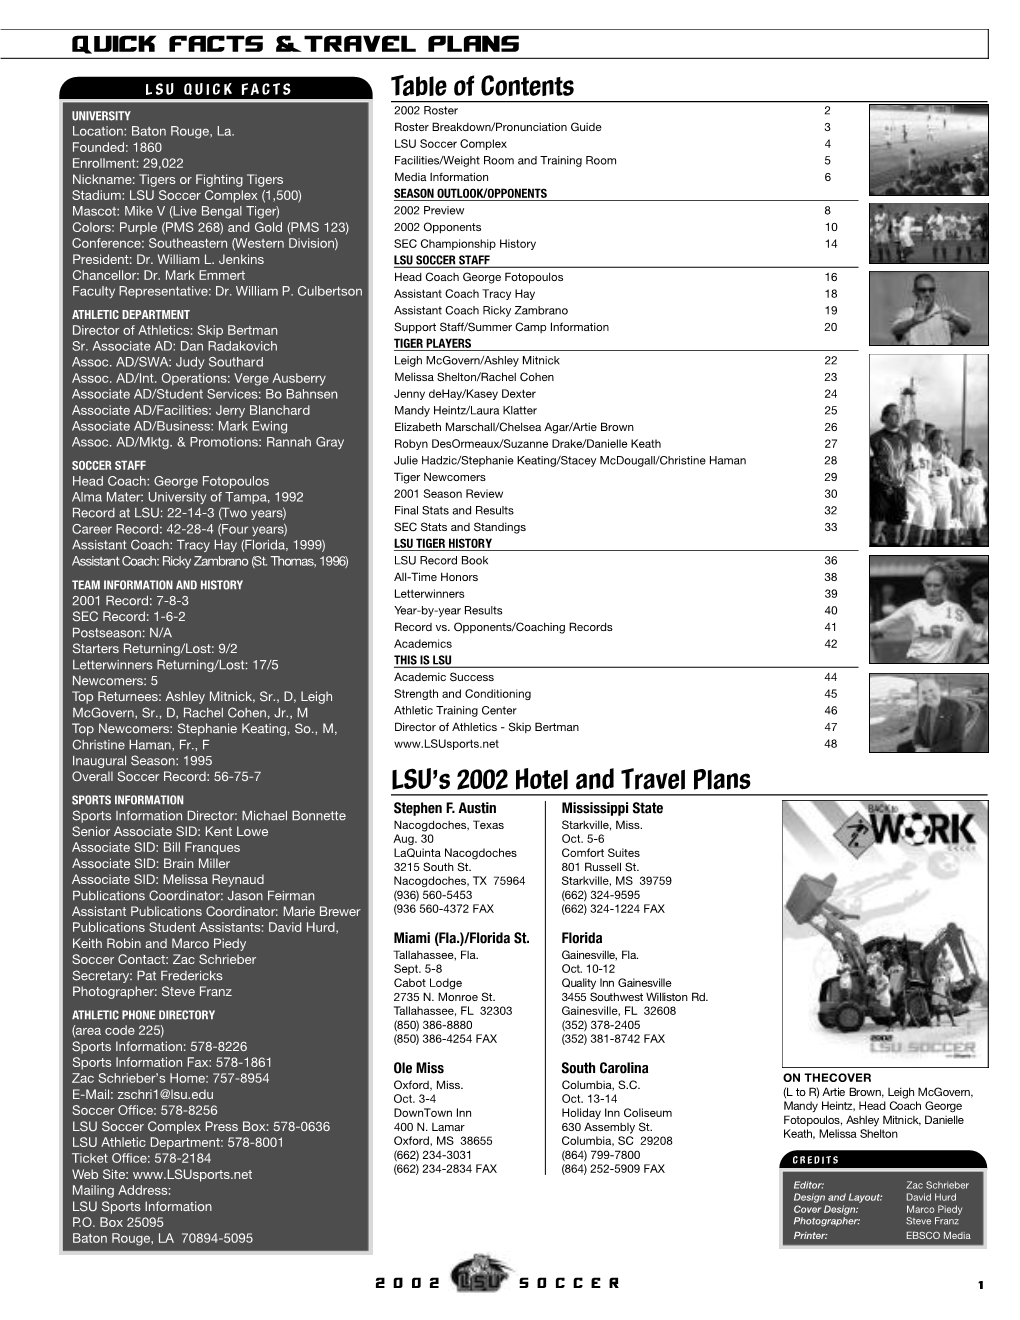 LSU's 2002 Hotel and Travel Plans Table of Contents